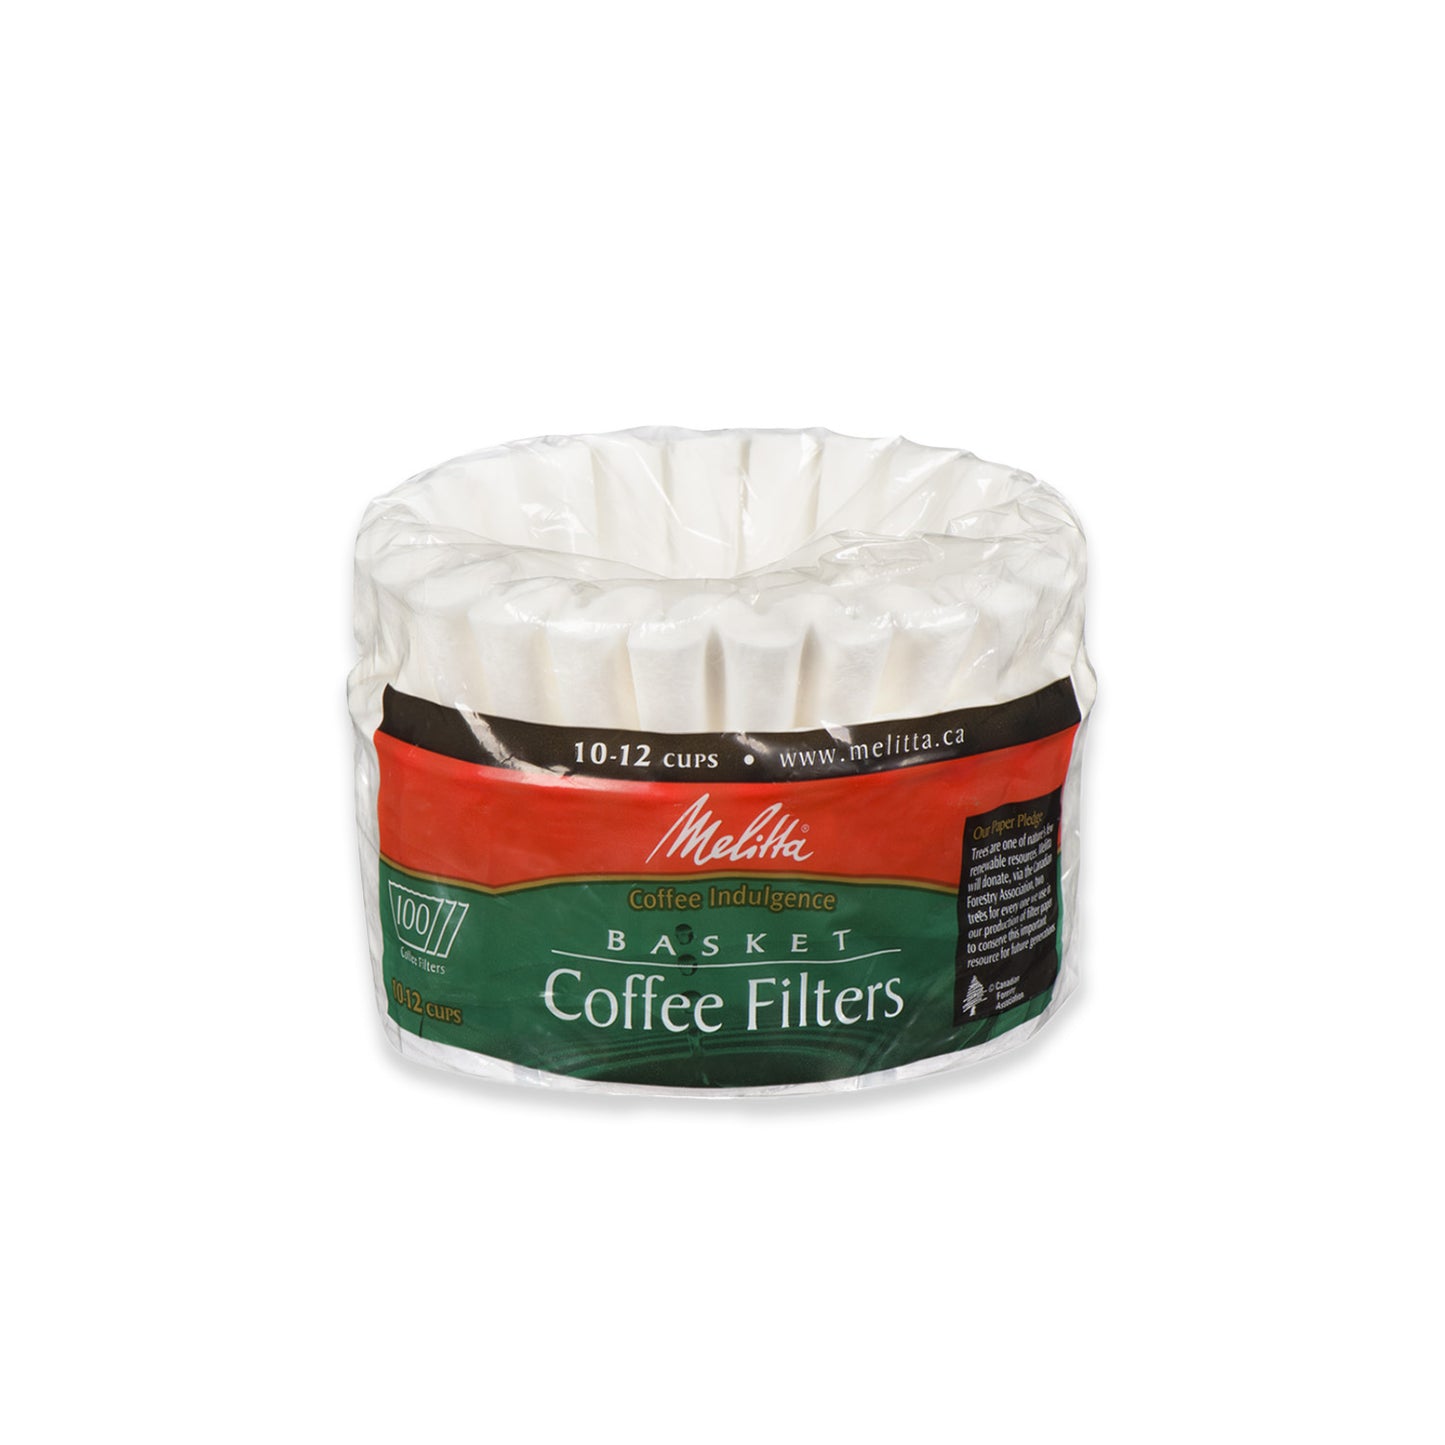 Coffee Filters - White (Basket)